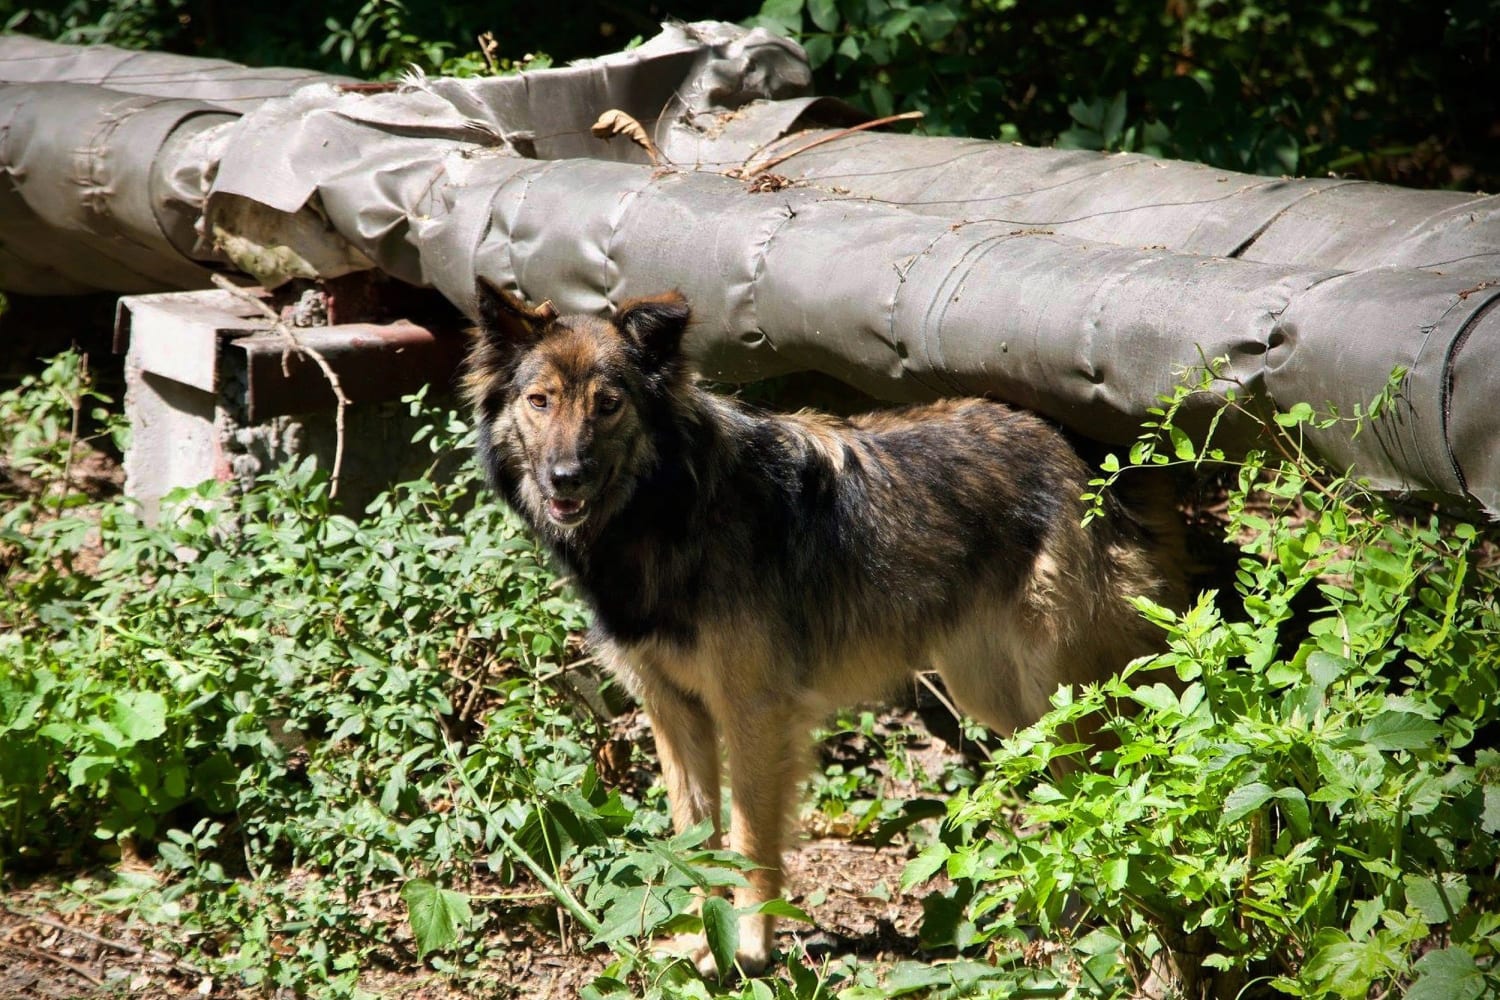 Can the dogs of Chernobyl teach us new tricks on survival?